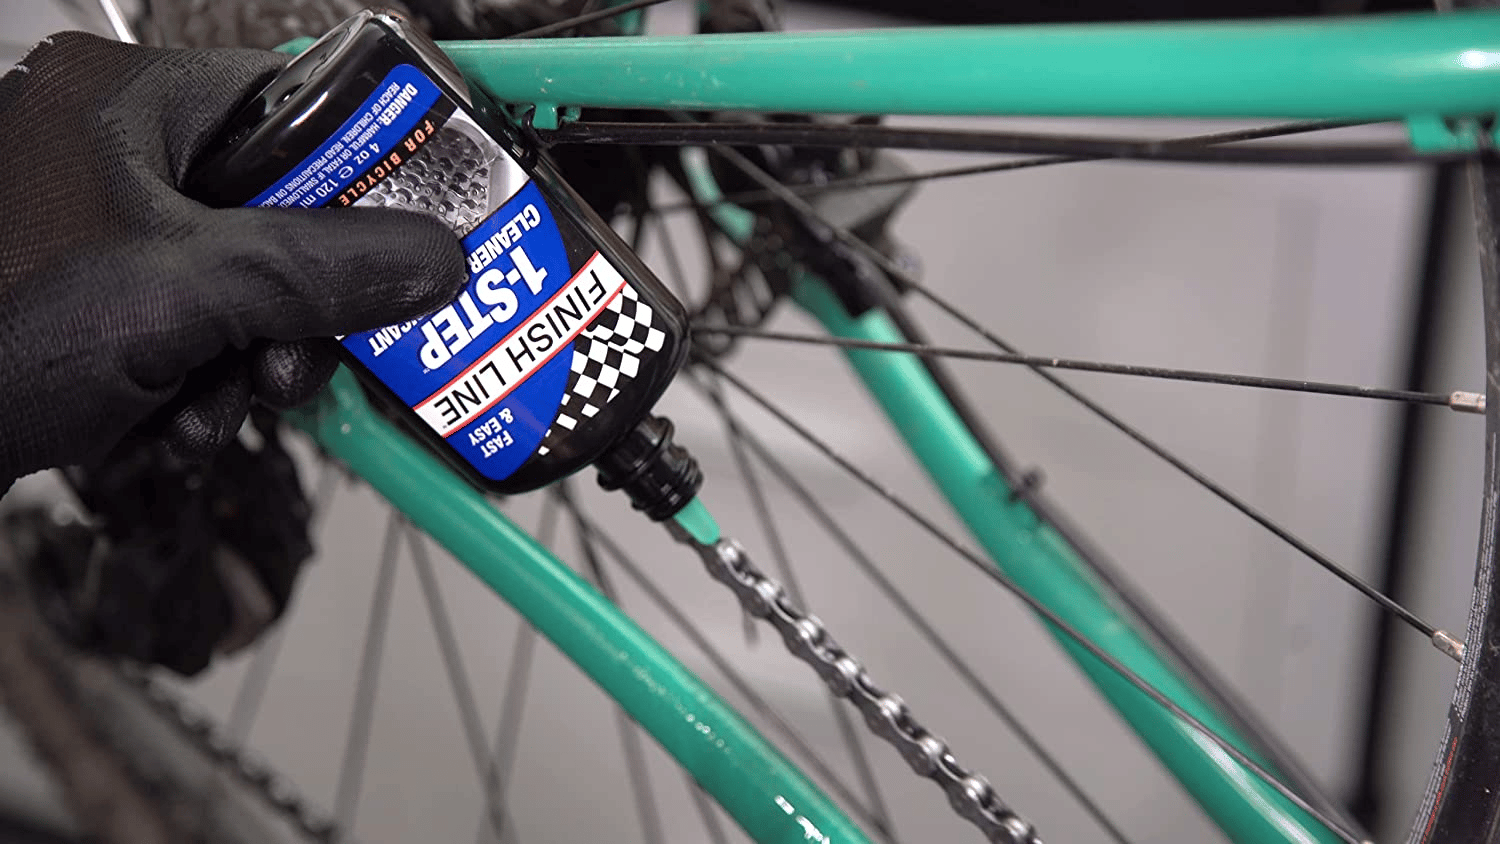 When trying to fix a mountain bike chain that keeps slipping or jumping gears, remove any excess lubricant to make it less slippery.